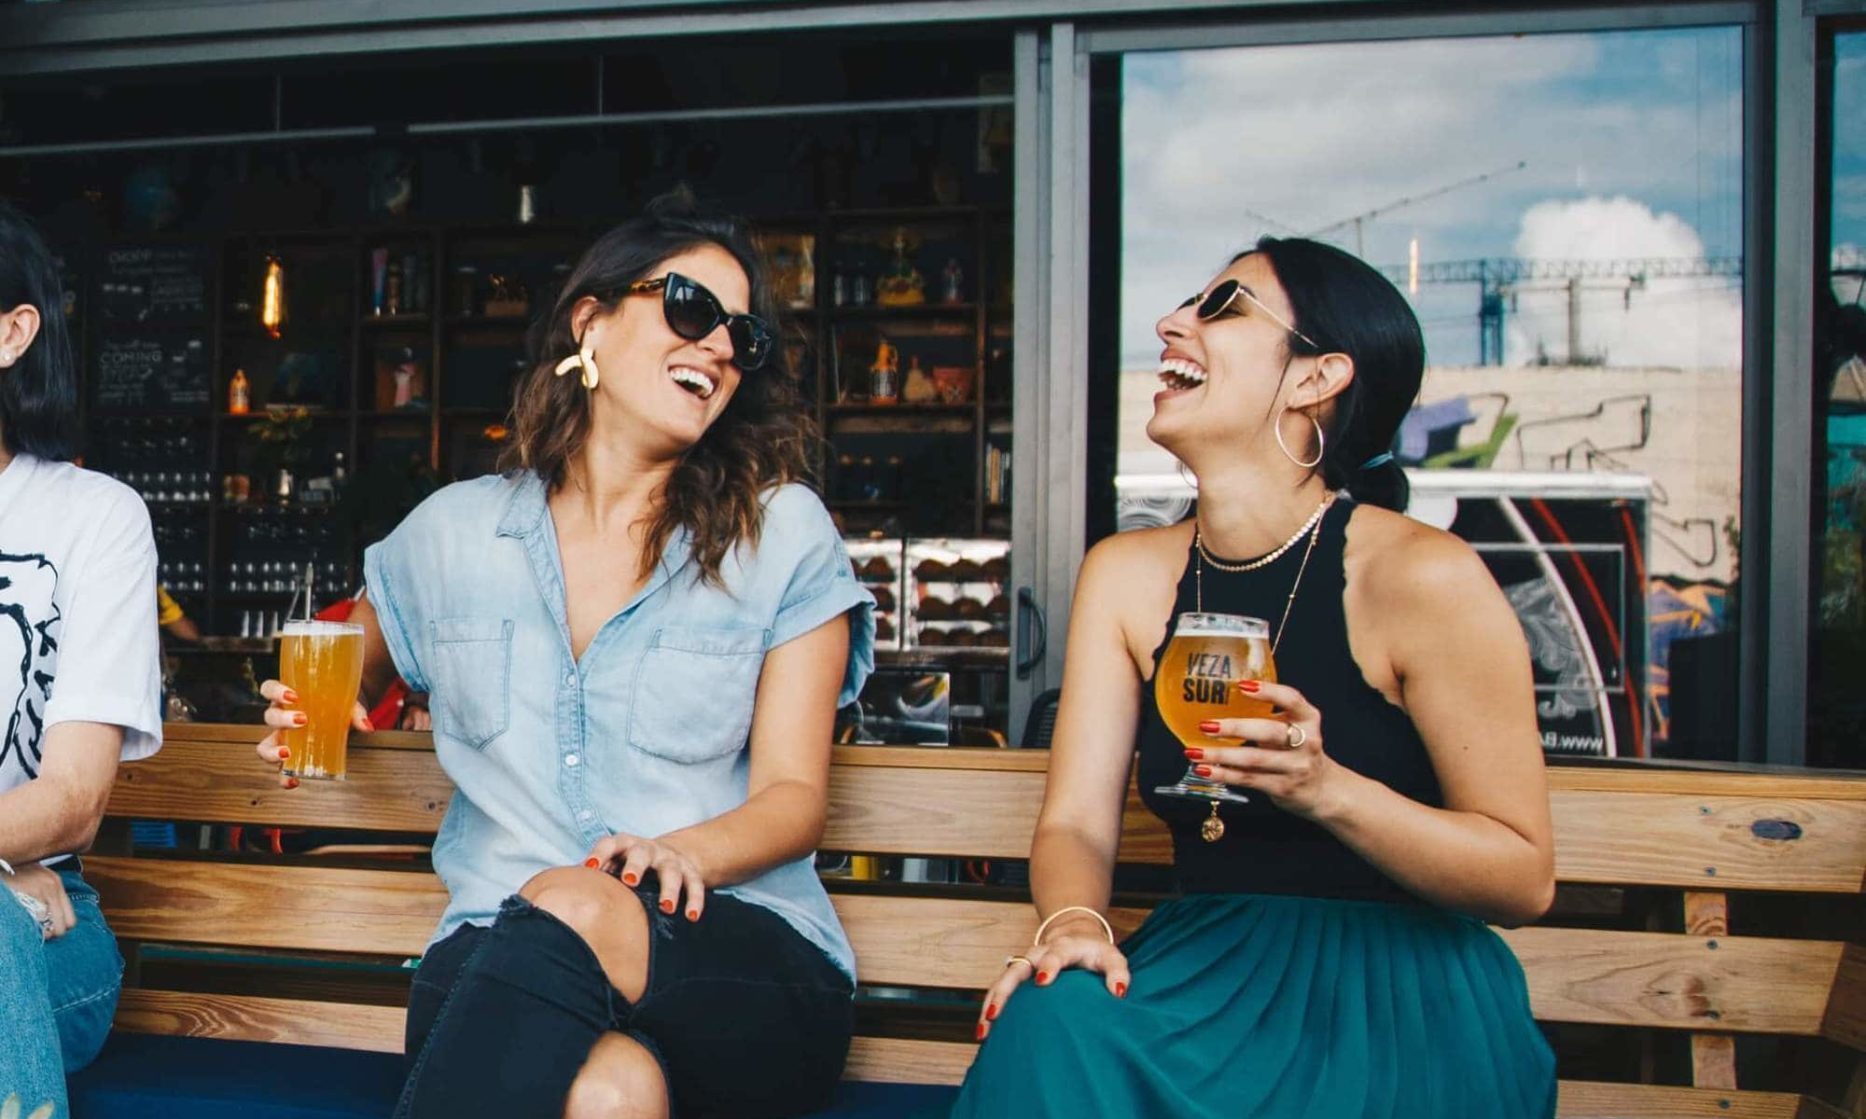 Two women laughing and drinking beer